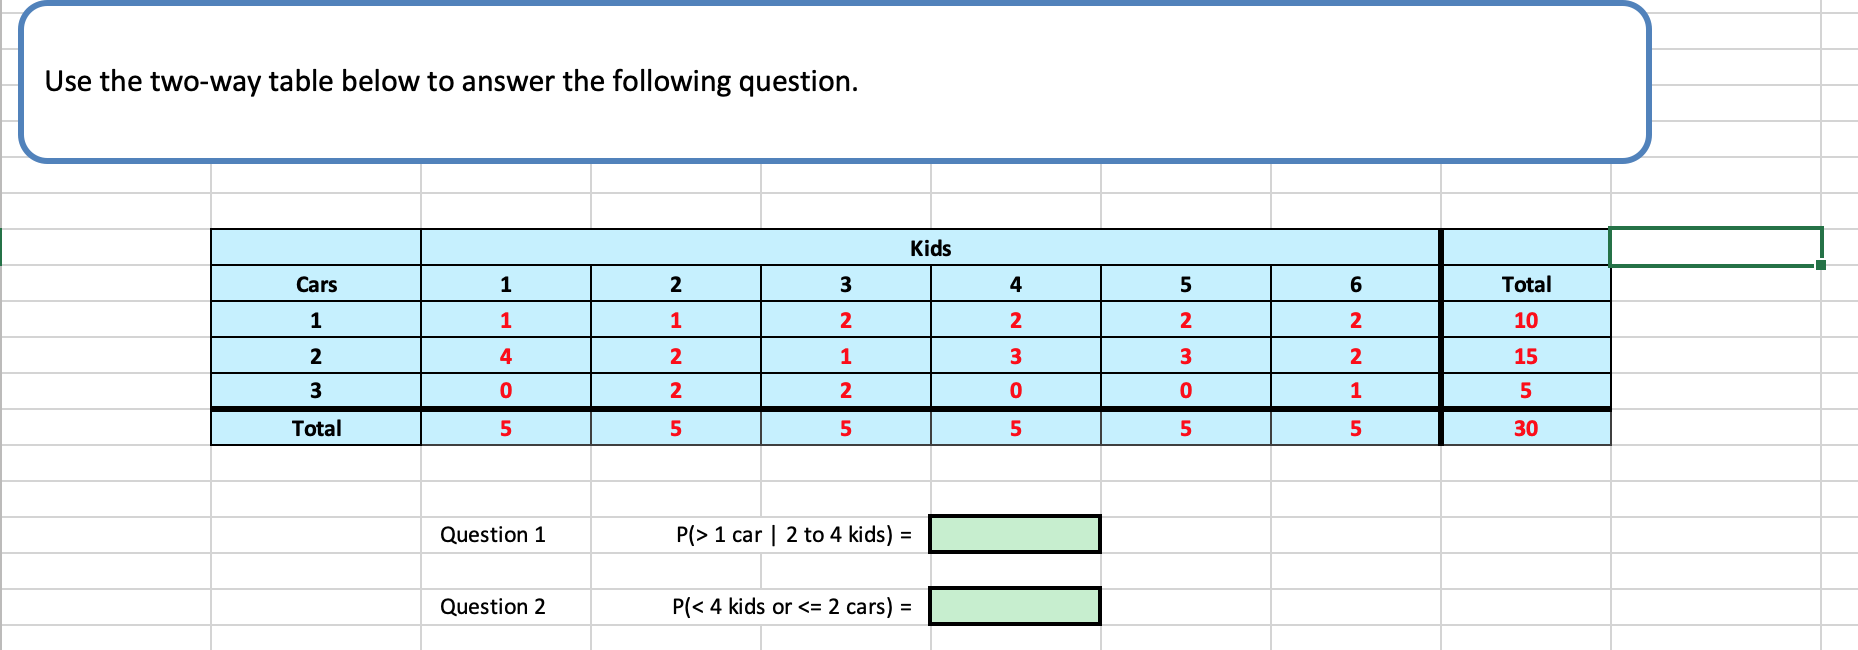 Use the two-way table below to answer the following question.
Kids
Cars
Total
10
15
2
3
6
2
3
Total
0
0
0
5
30
Question 1
P(> 1 car | 2 to 4 kids)
Question 2
P(< 4 kids or <: 2 cars)-
